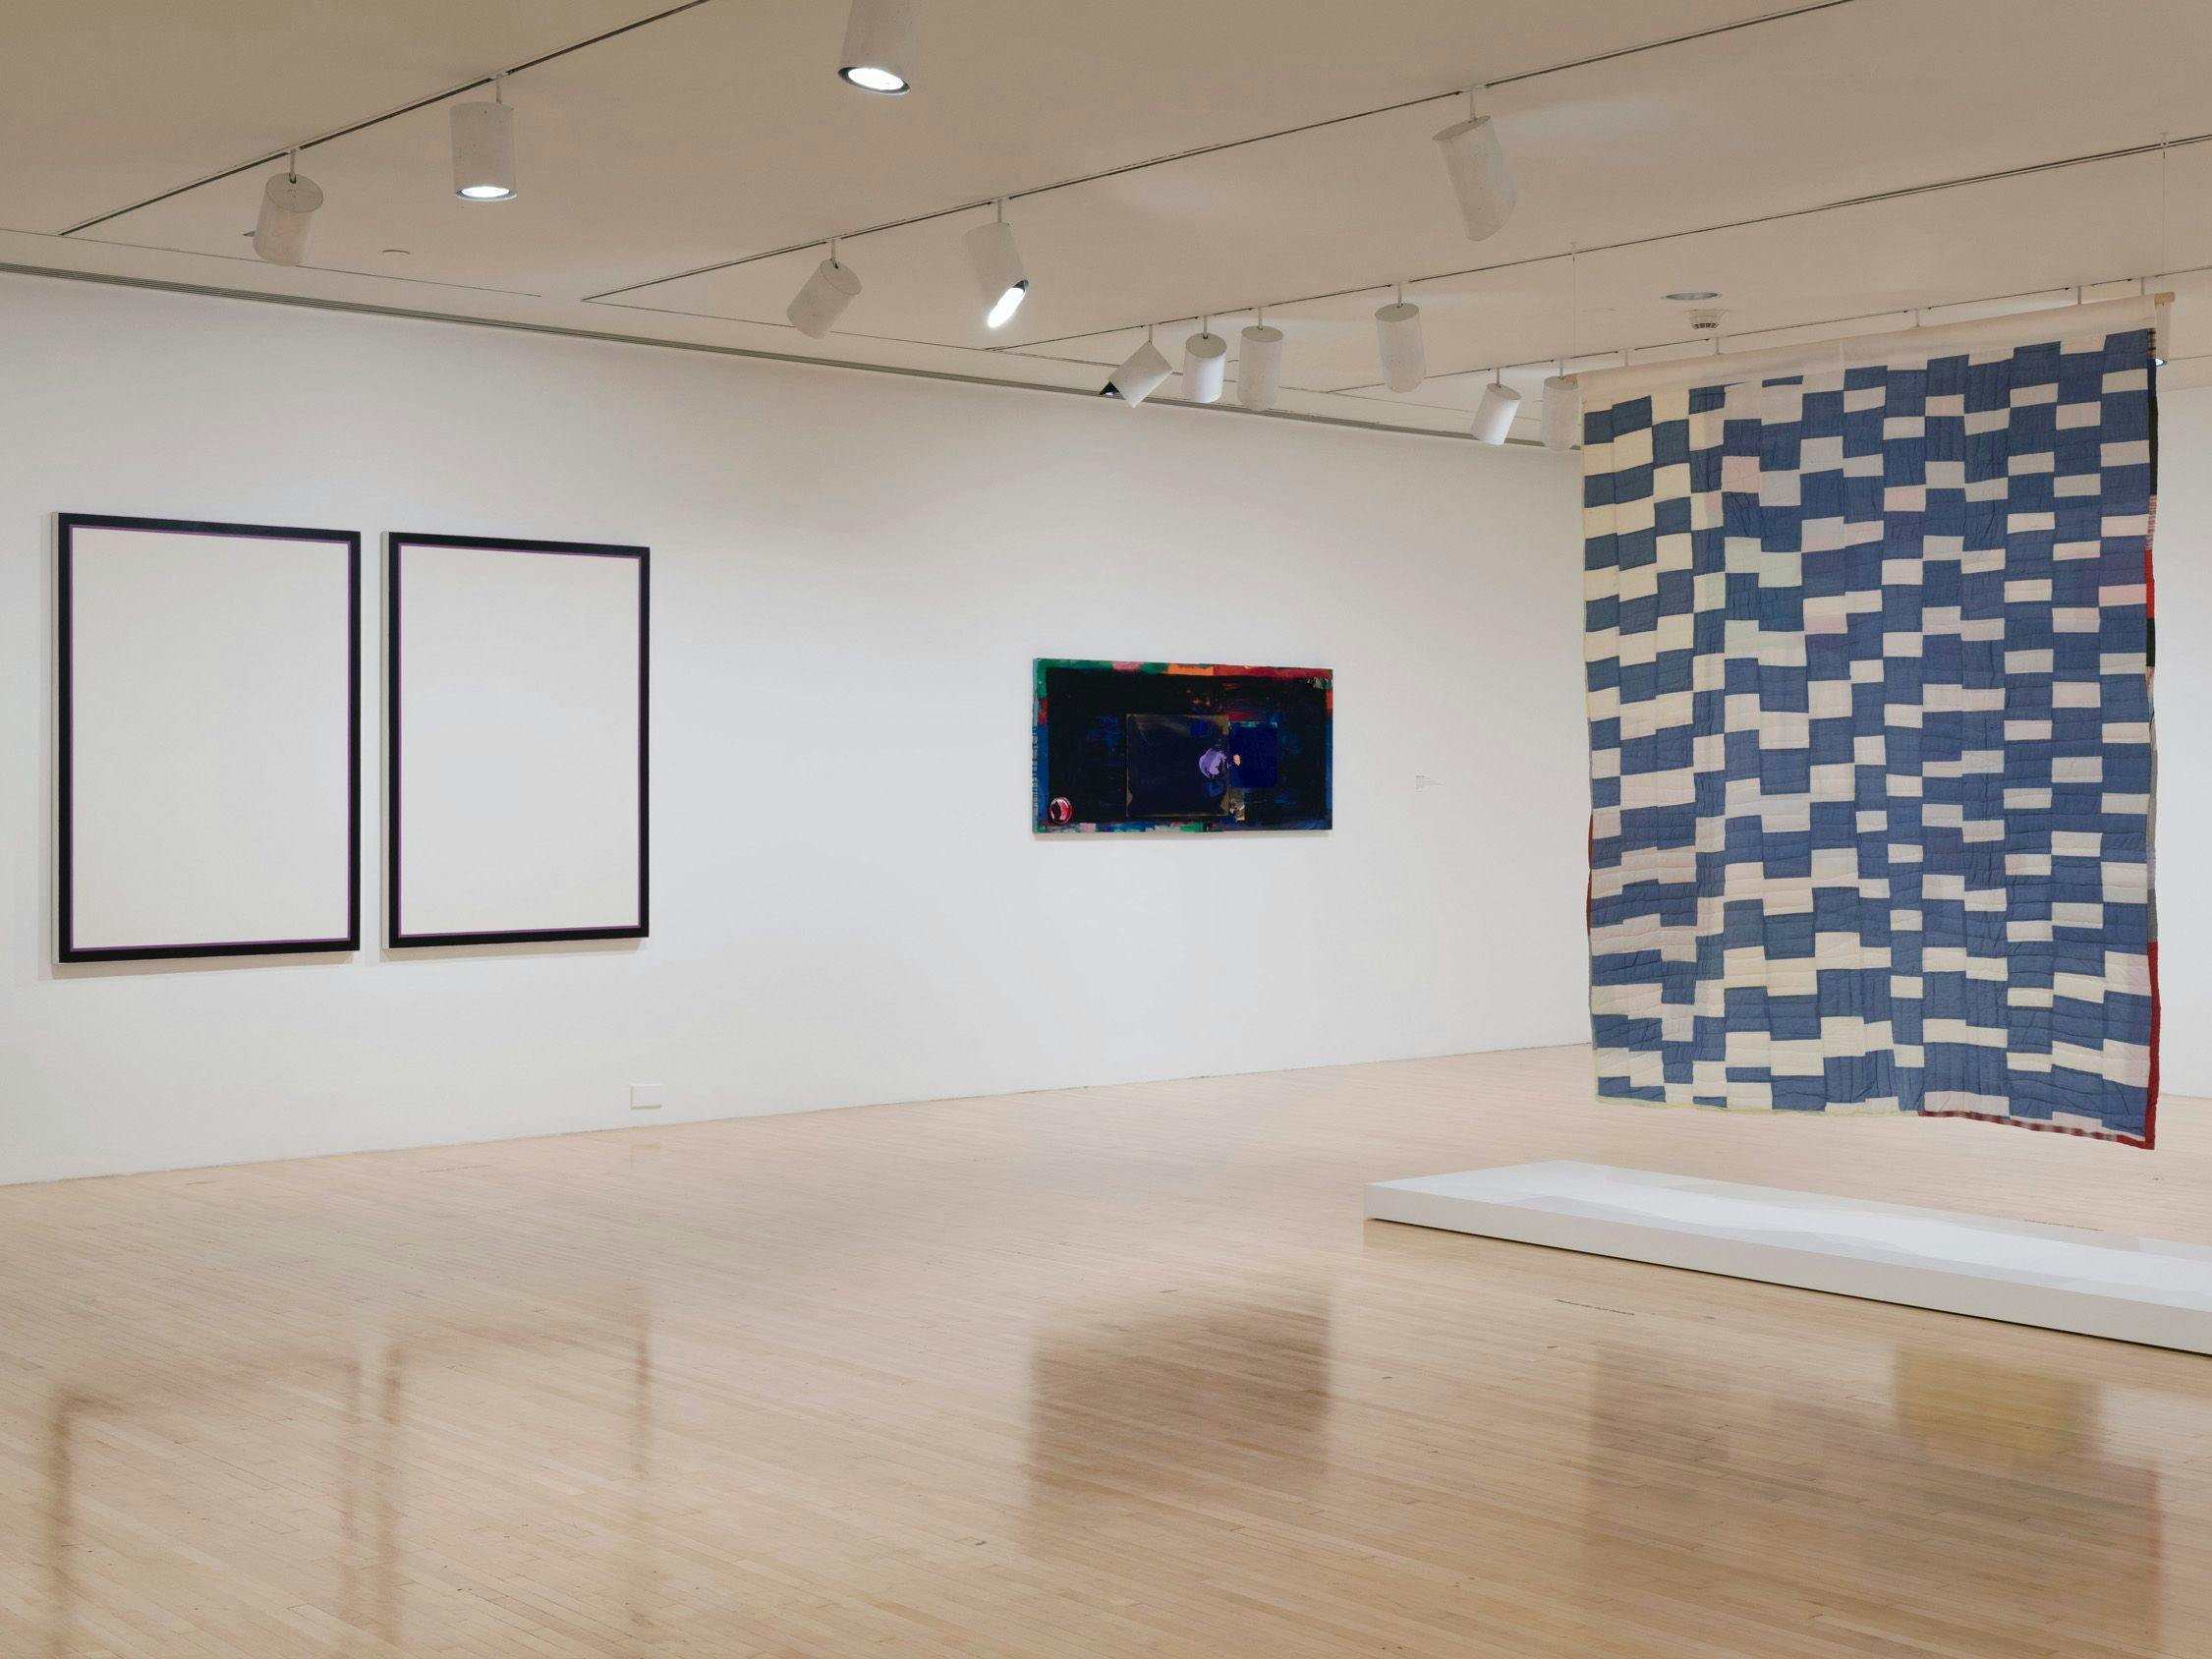 An installation view of the exhibition, Old and New Dreams: Recent Acquisitions in a Collection, at the Museum of Contemporary Art in Los Angeles, dated 2022.